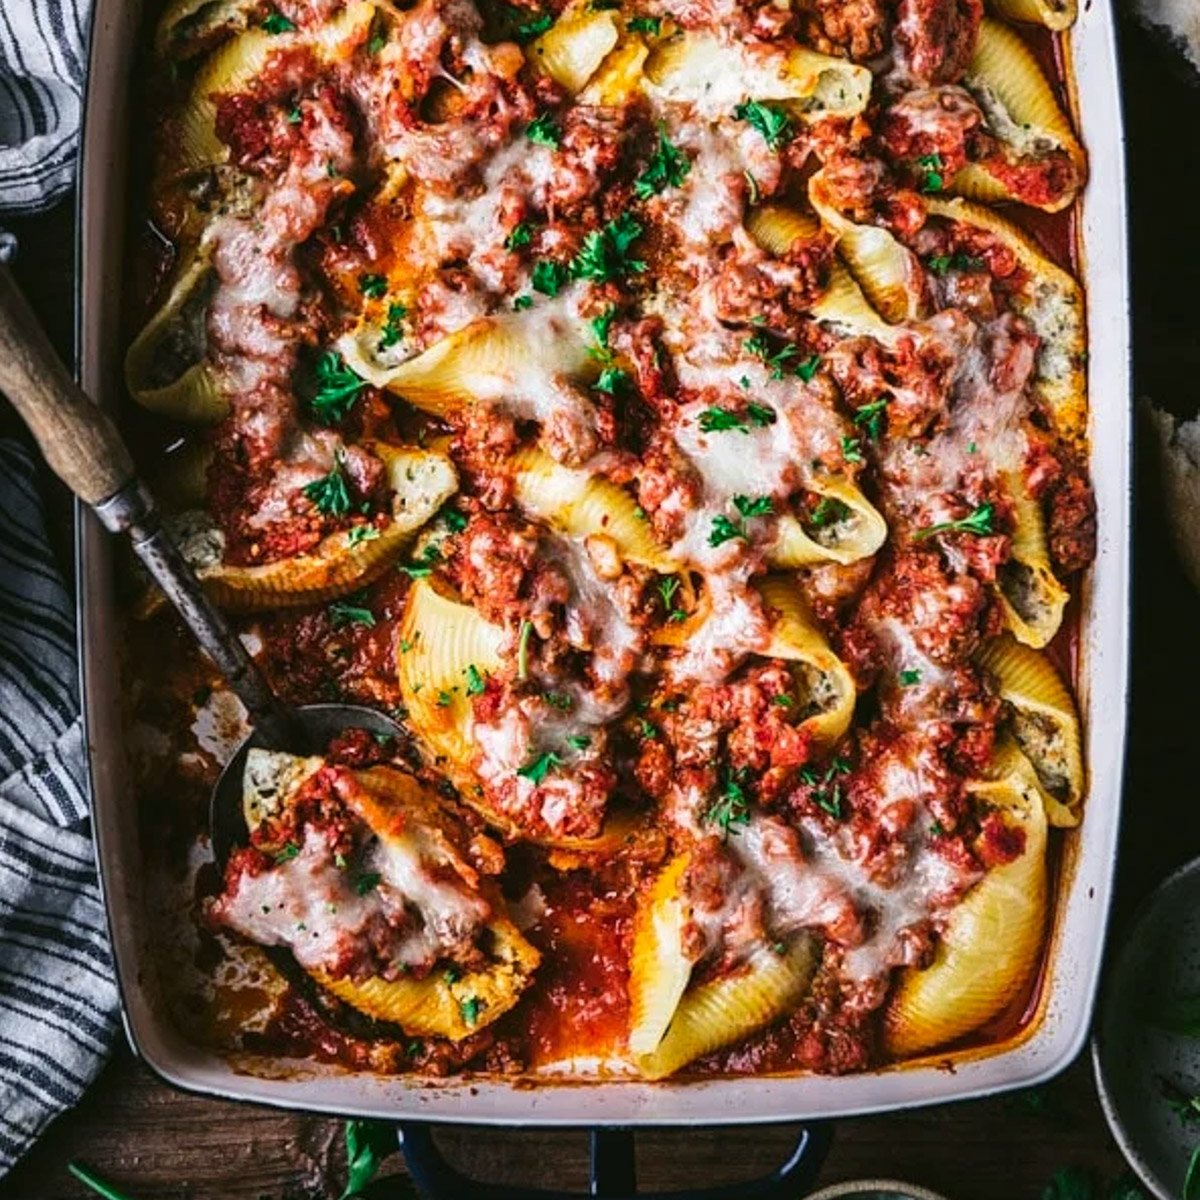 Top 3 Stuffed Shells Recipes With Meat